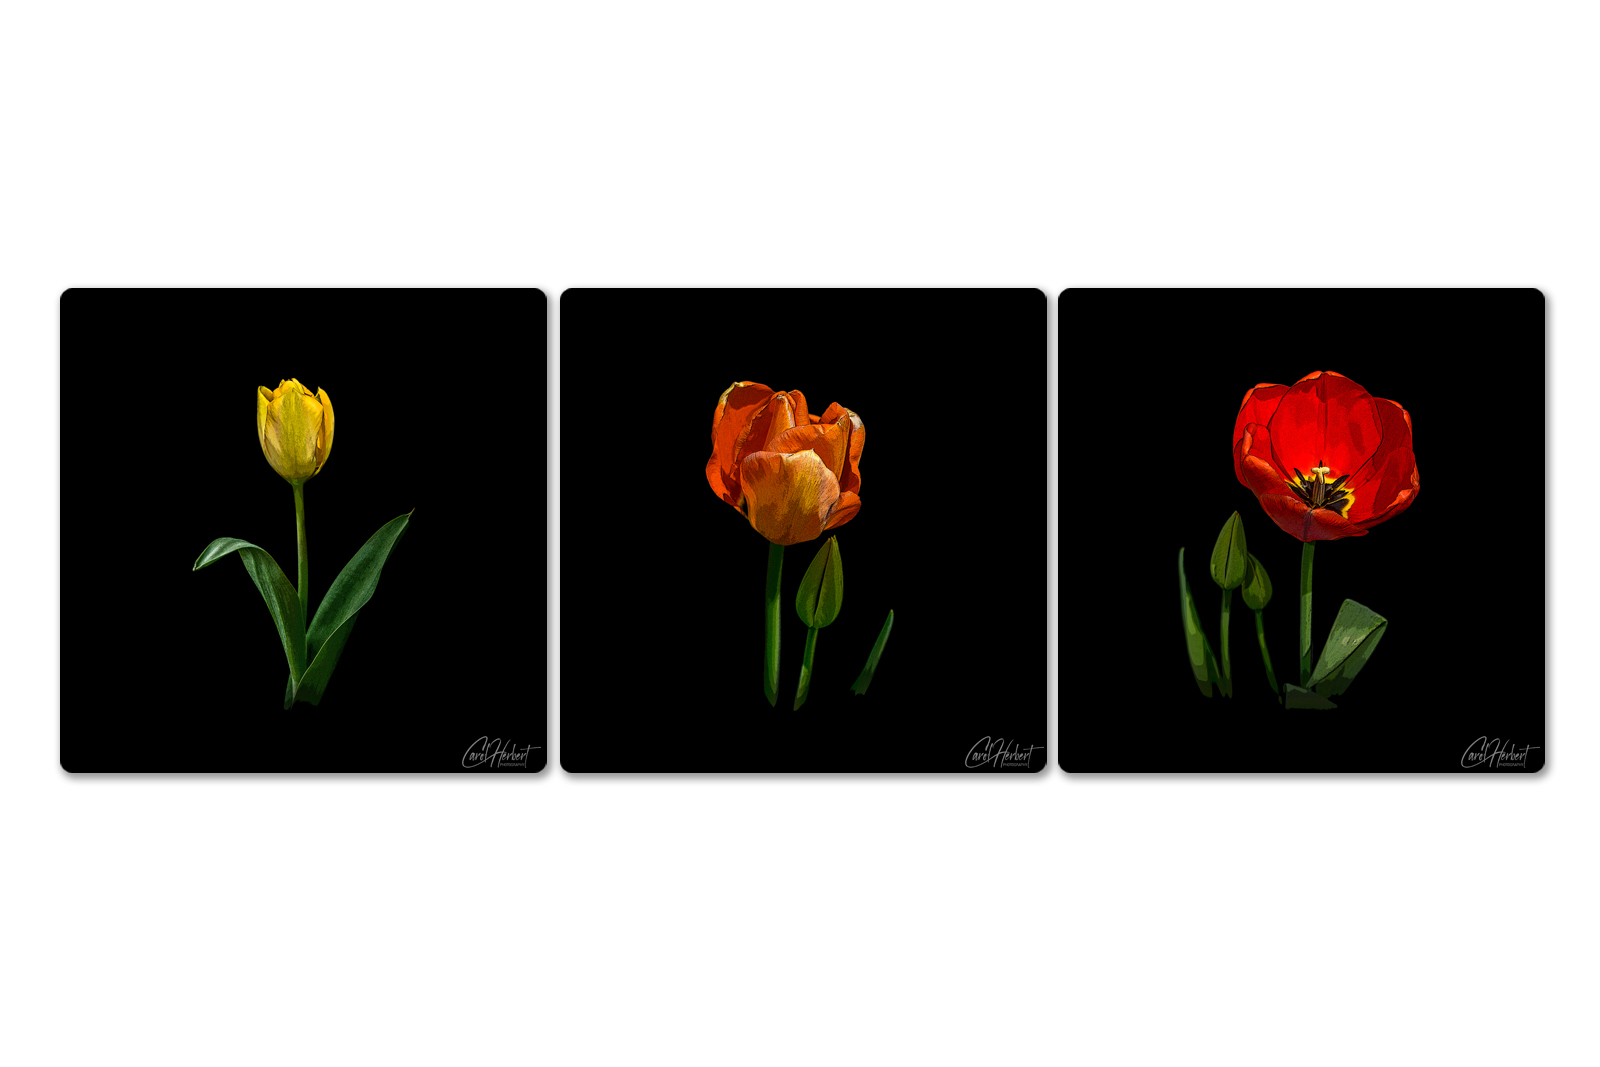 Three canvases with a single yellow, orange and red tulip in a pop art style